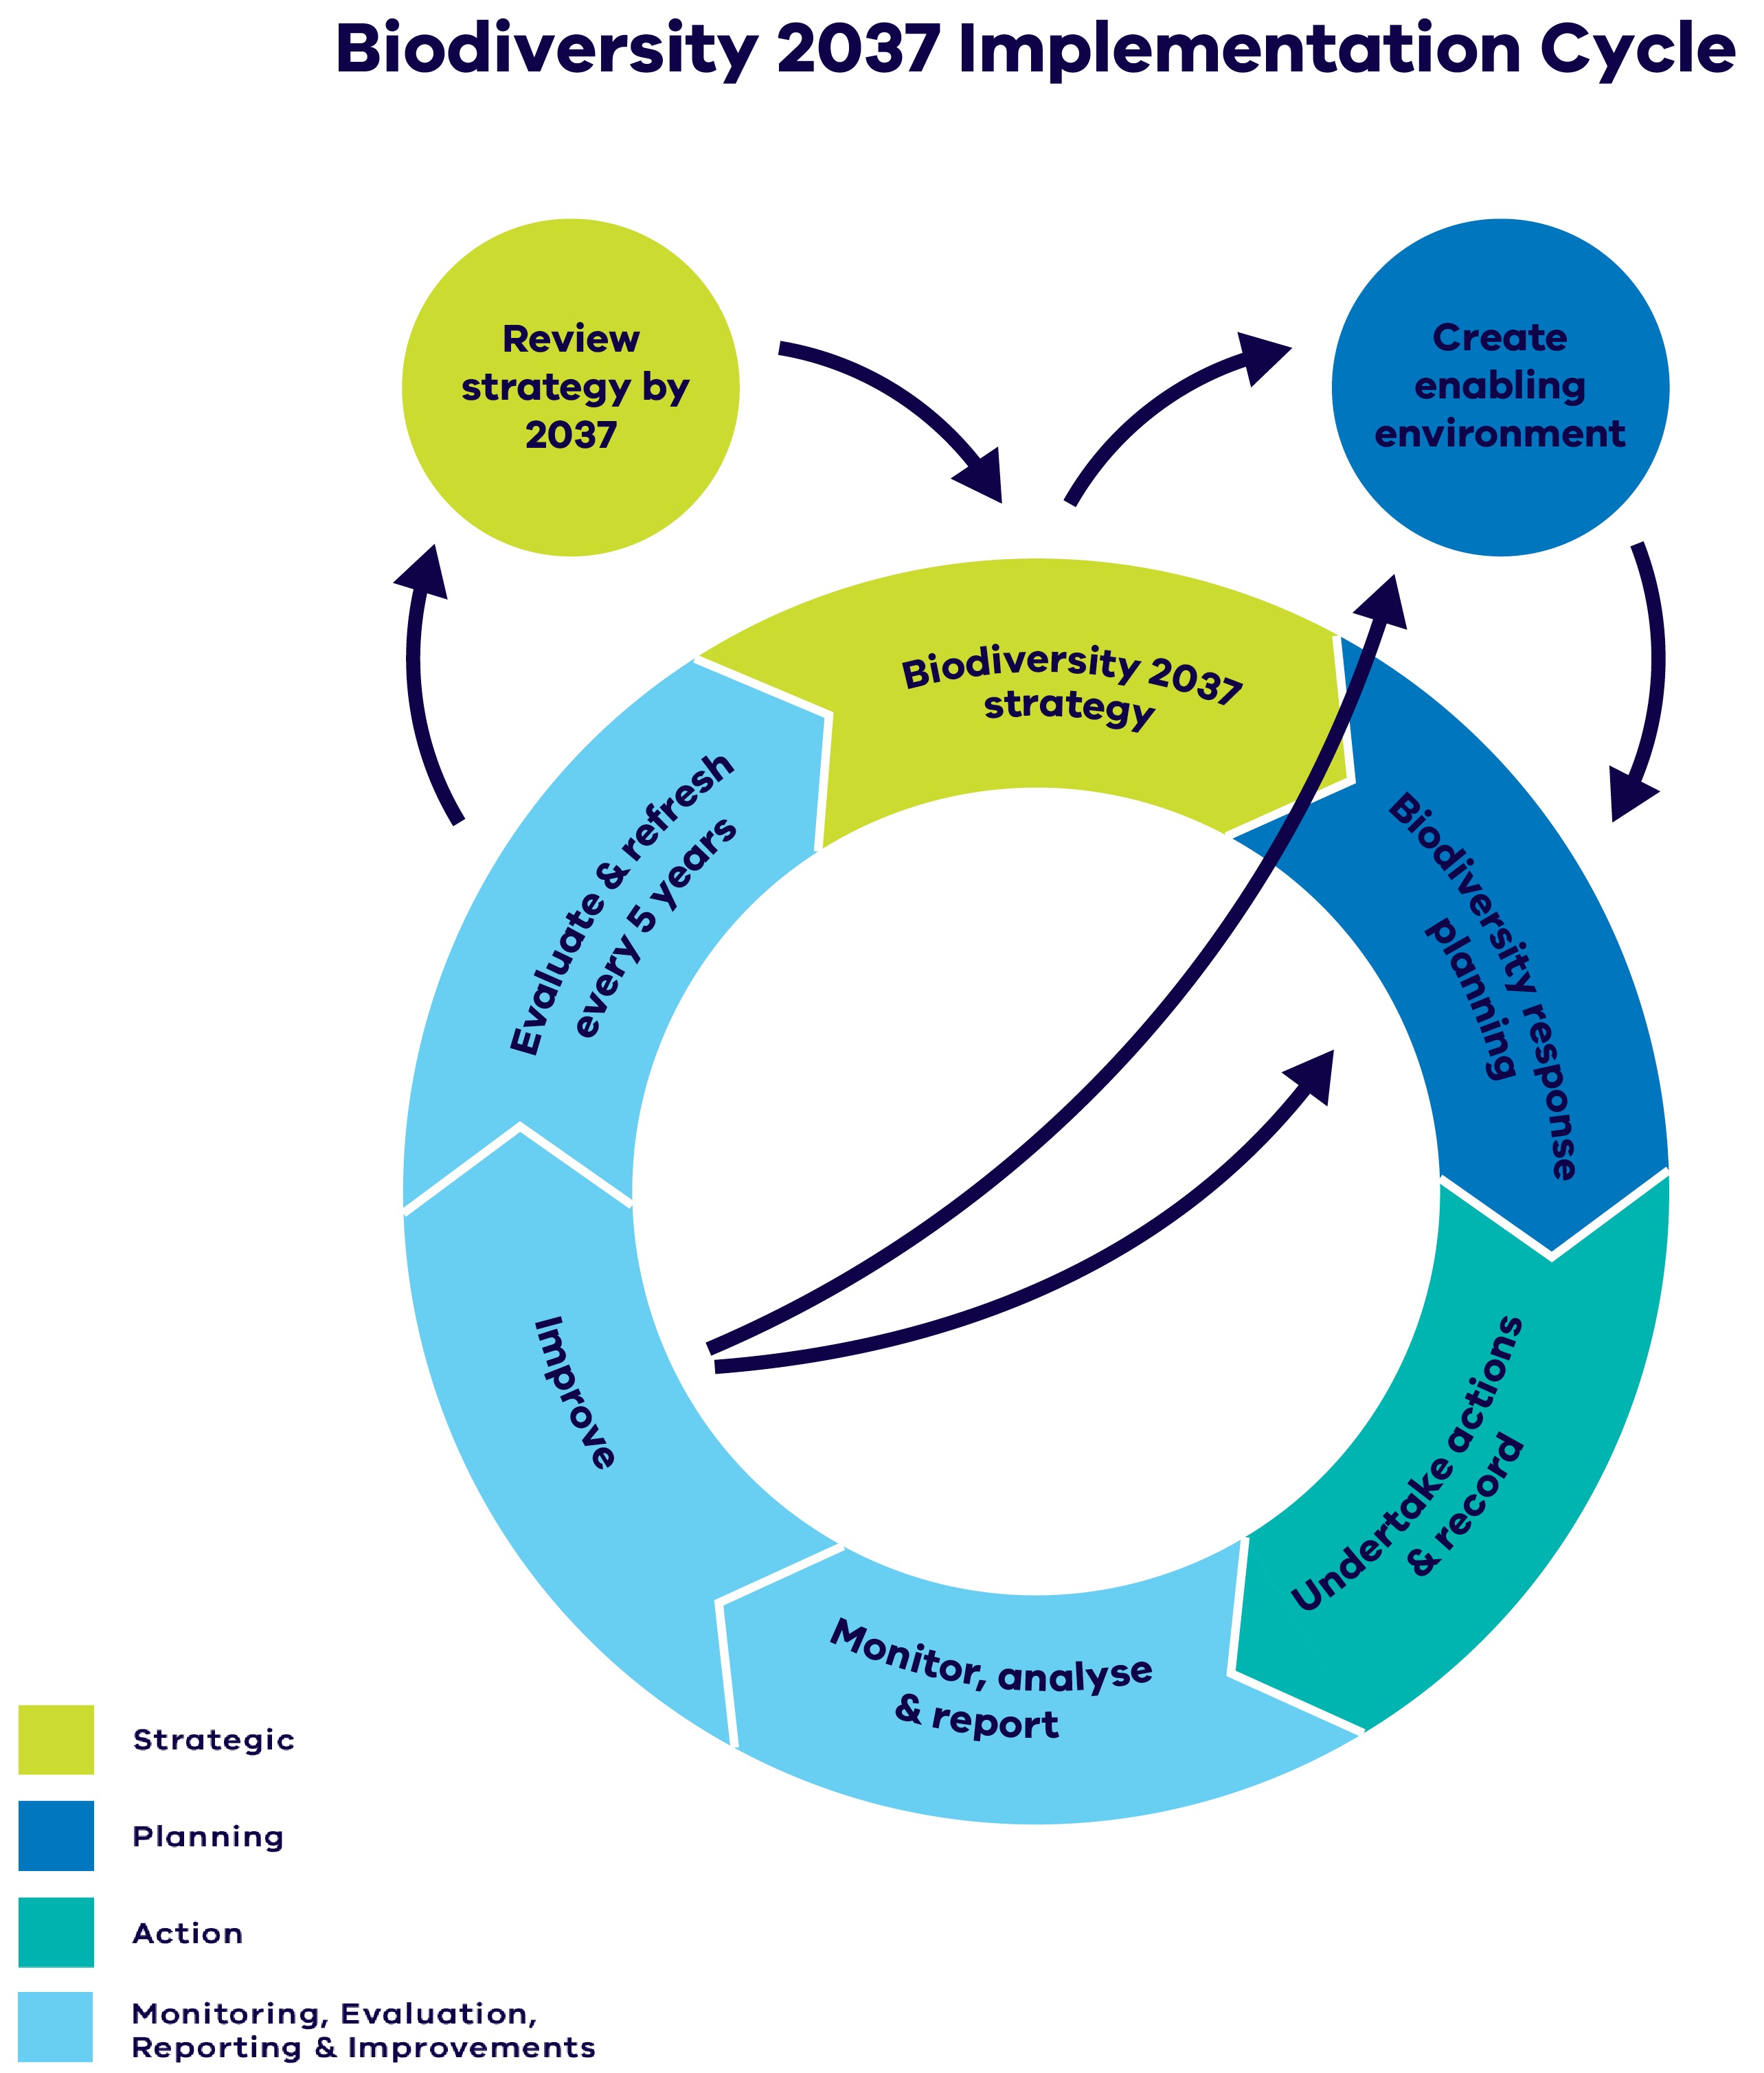 A simple version of the Biodiversity 2037 Implementation Cycle. The cycle is described in detail in the MERF